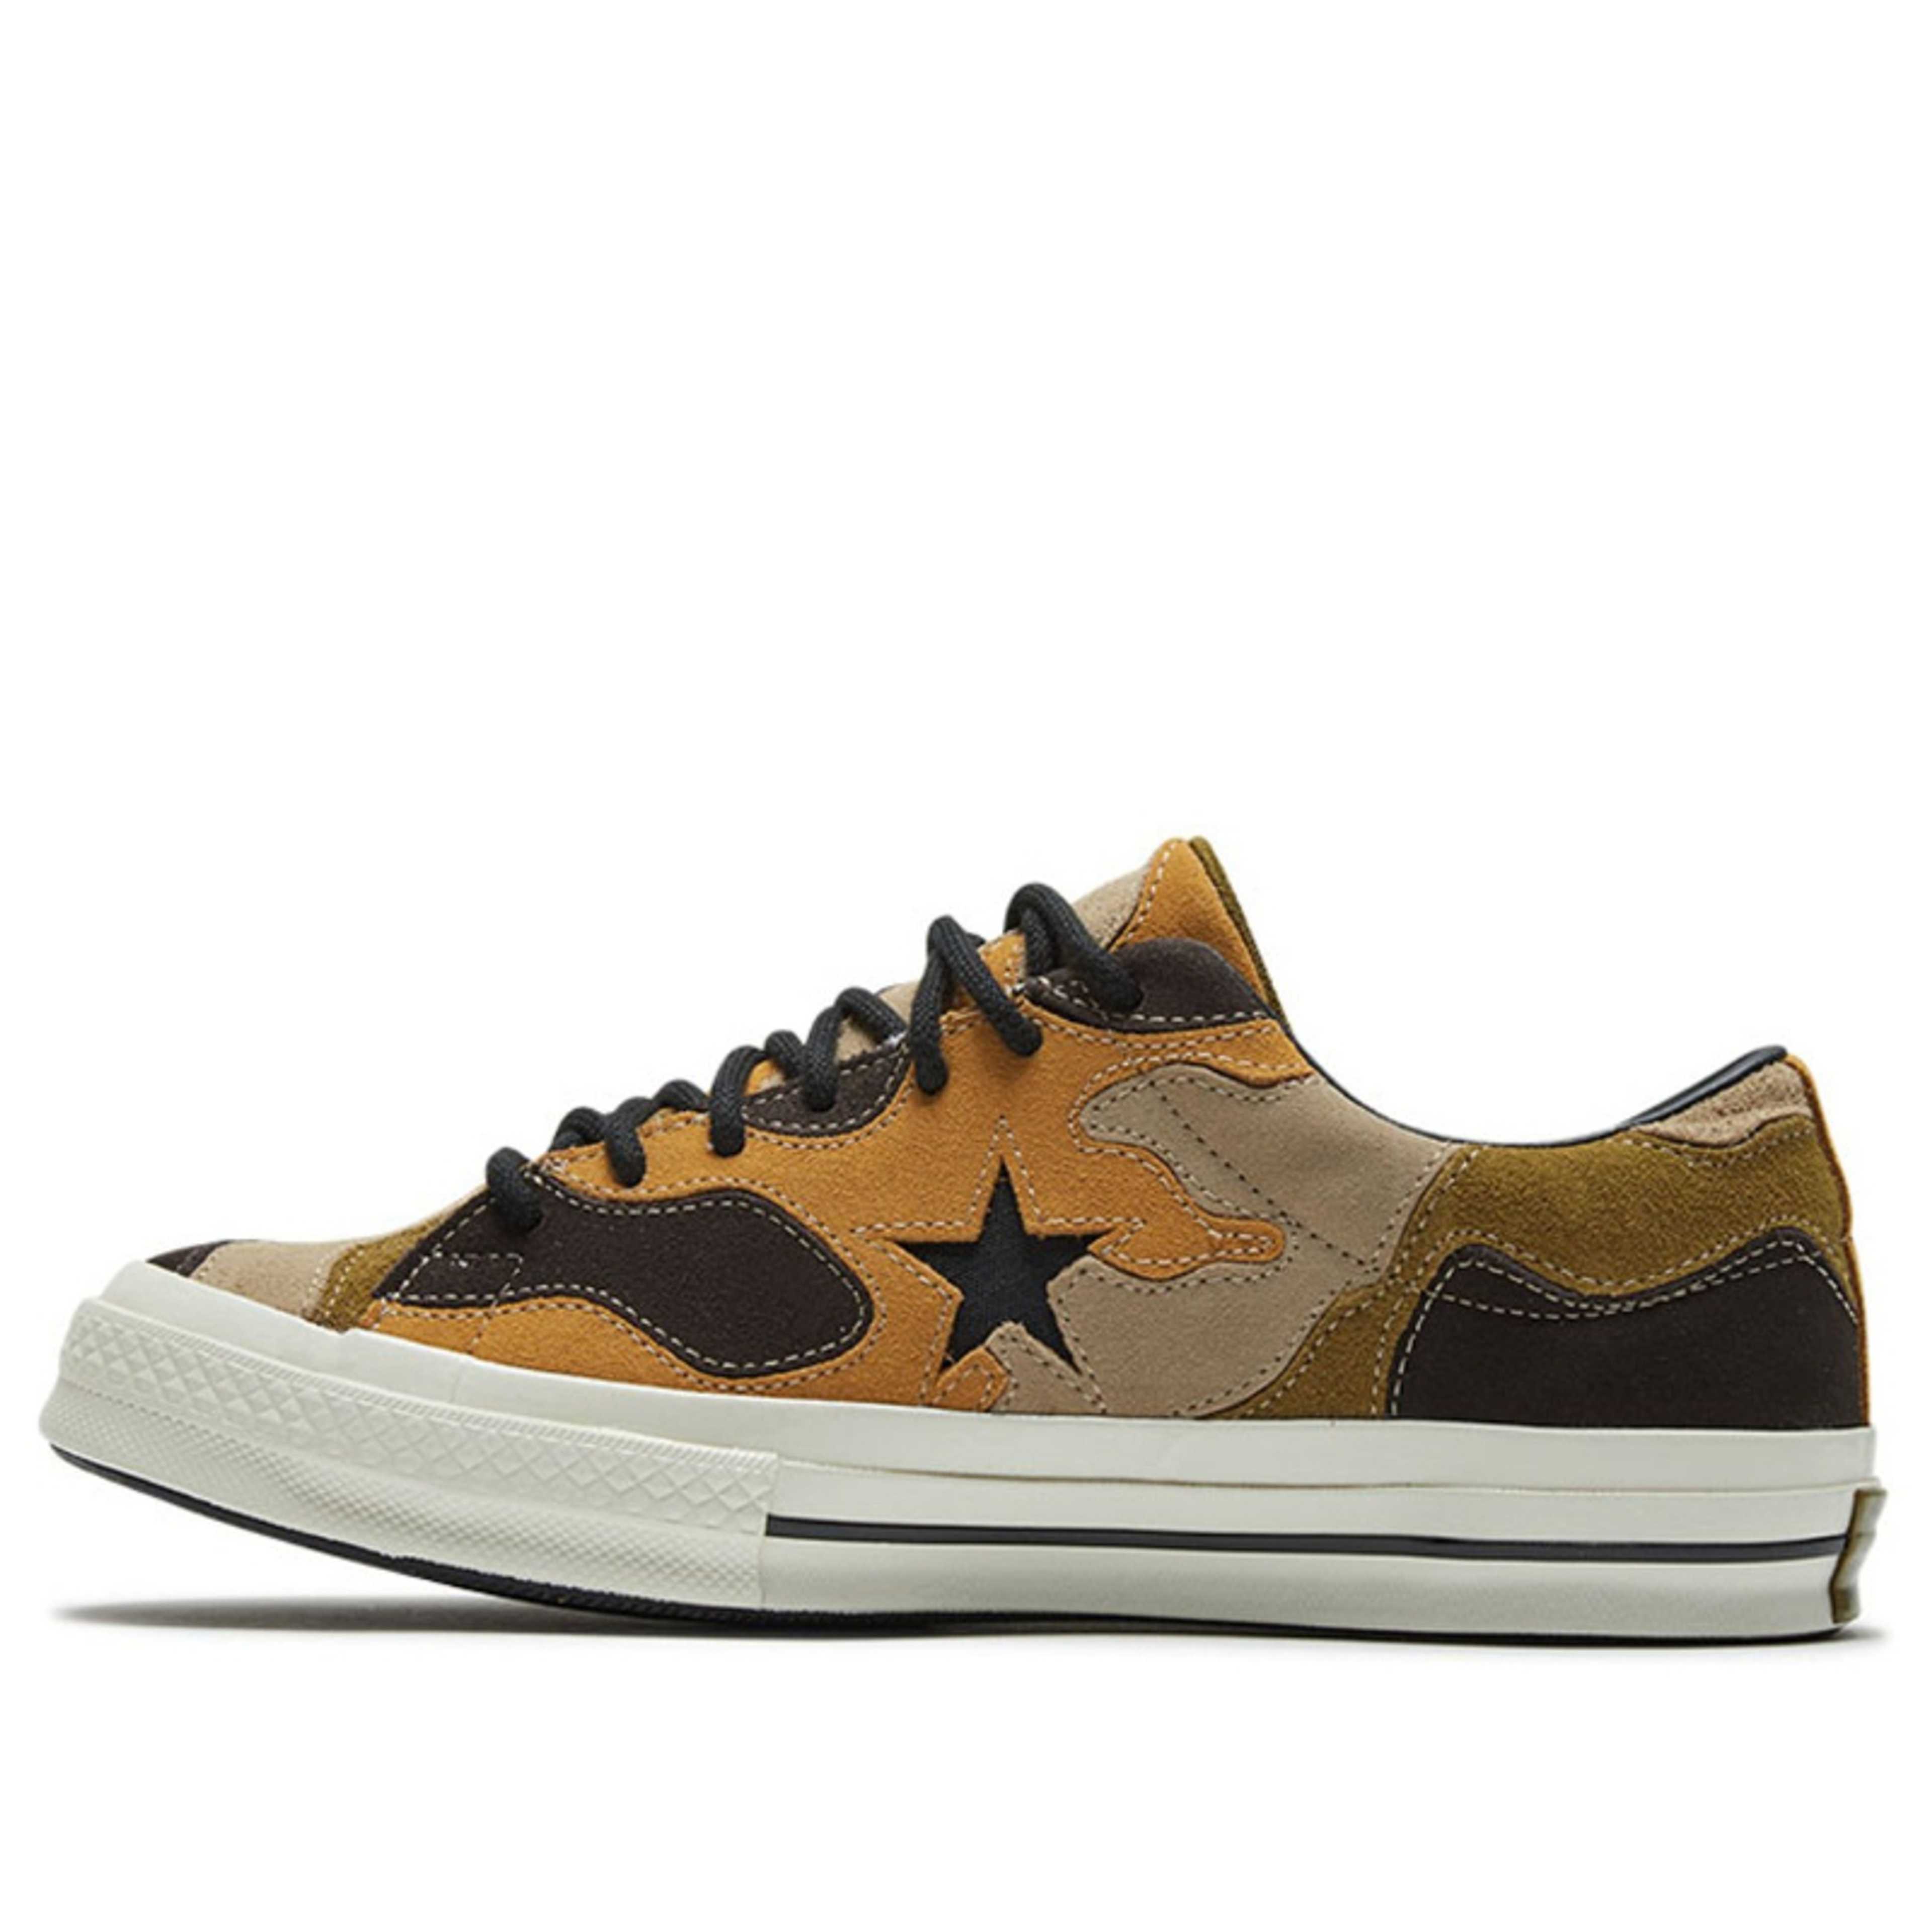 New Converse One Star OX-19